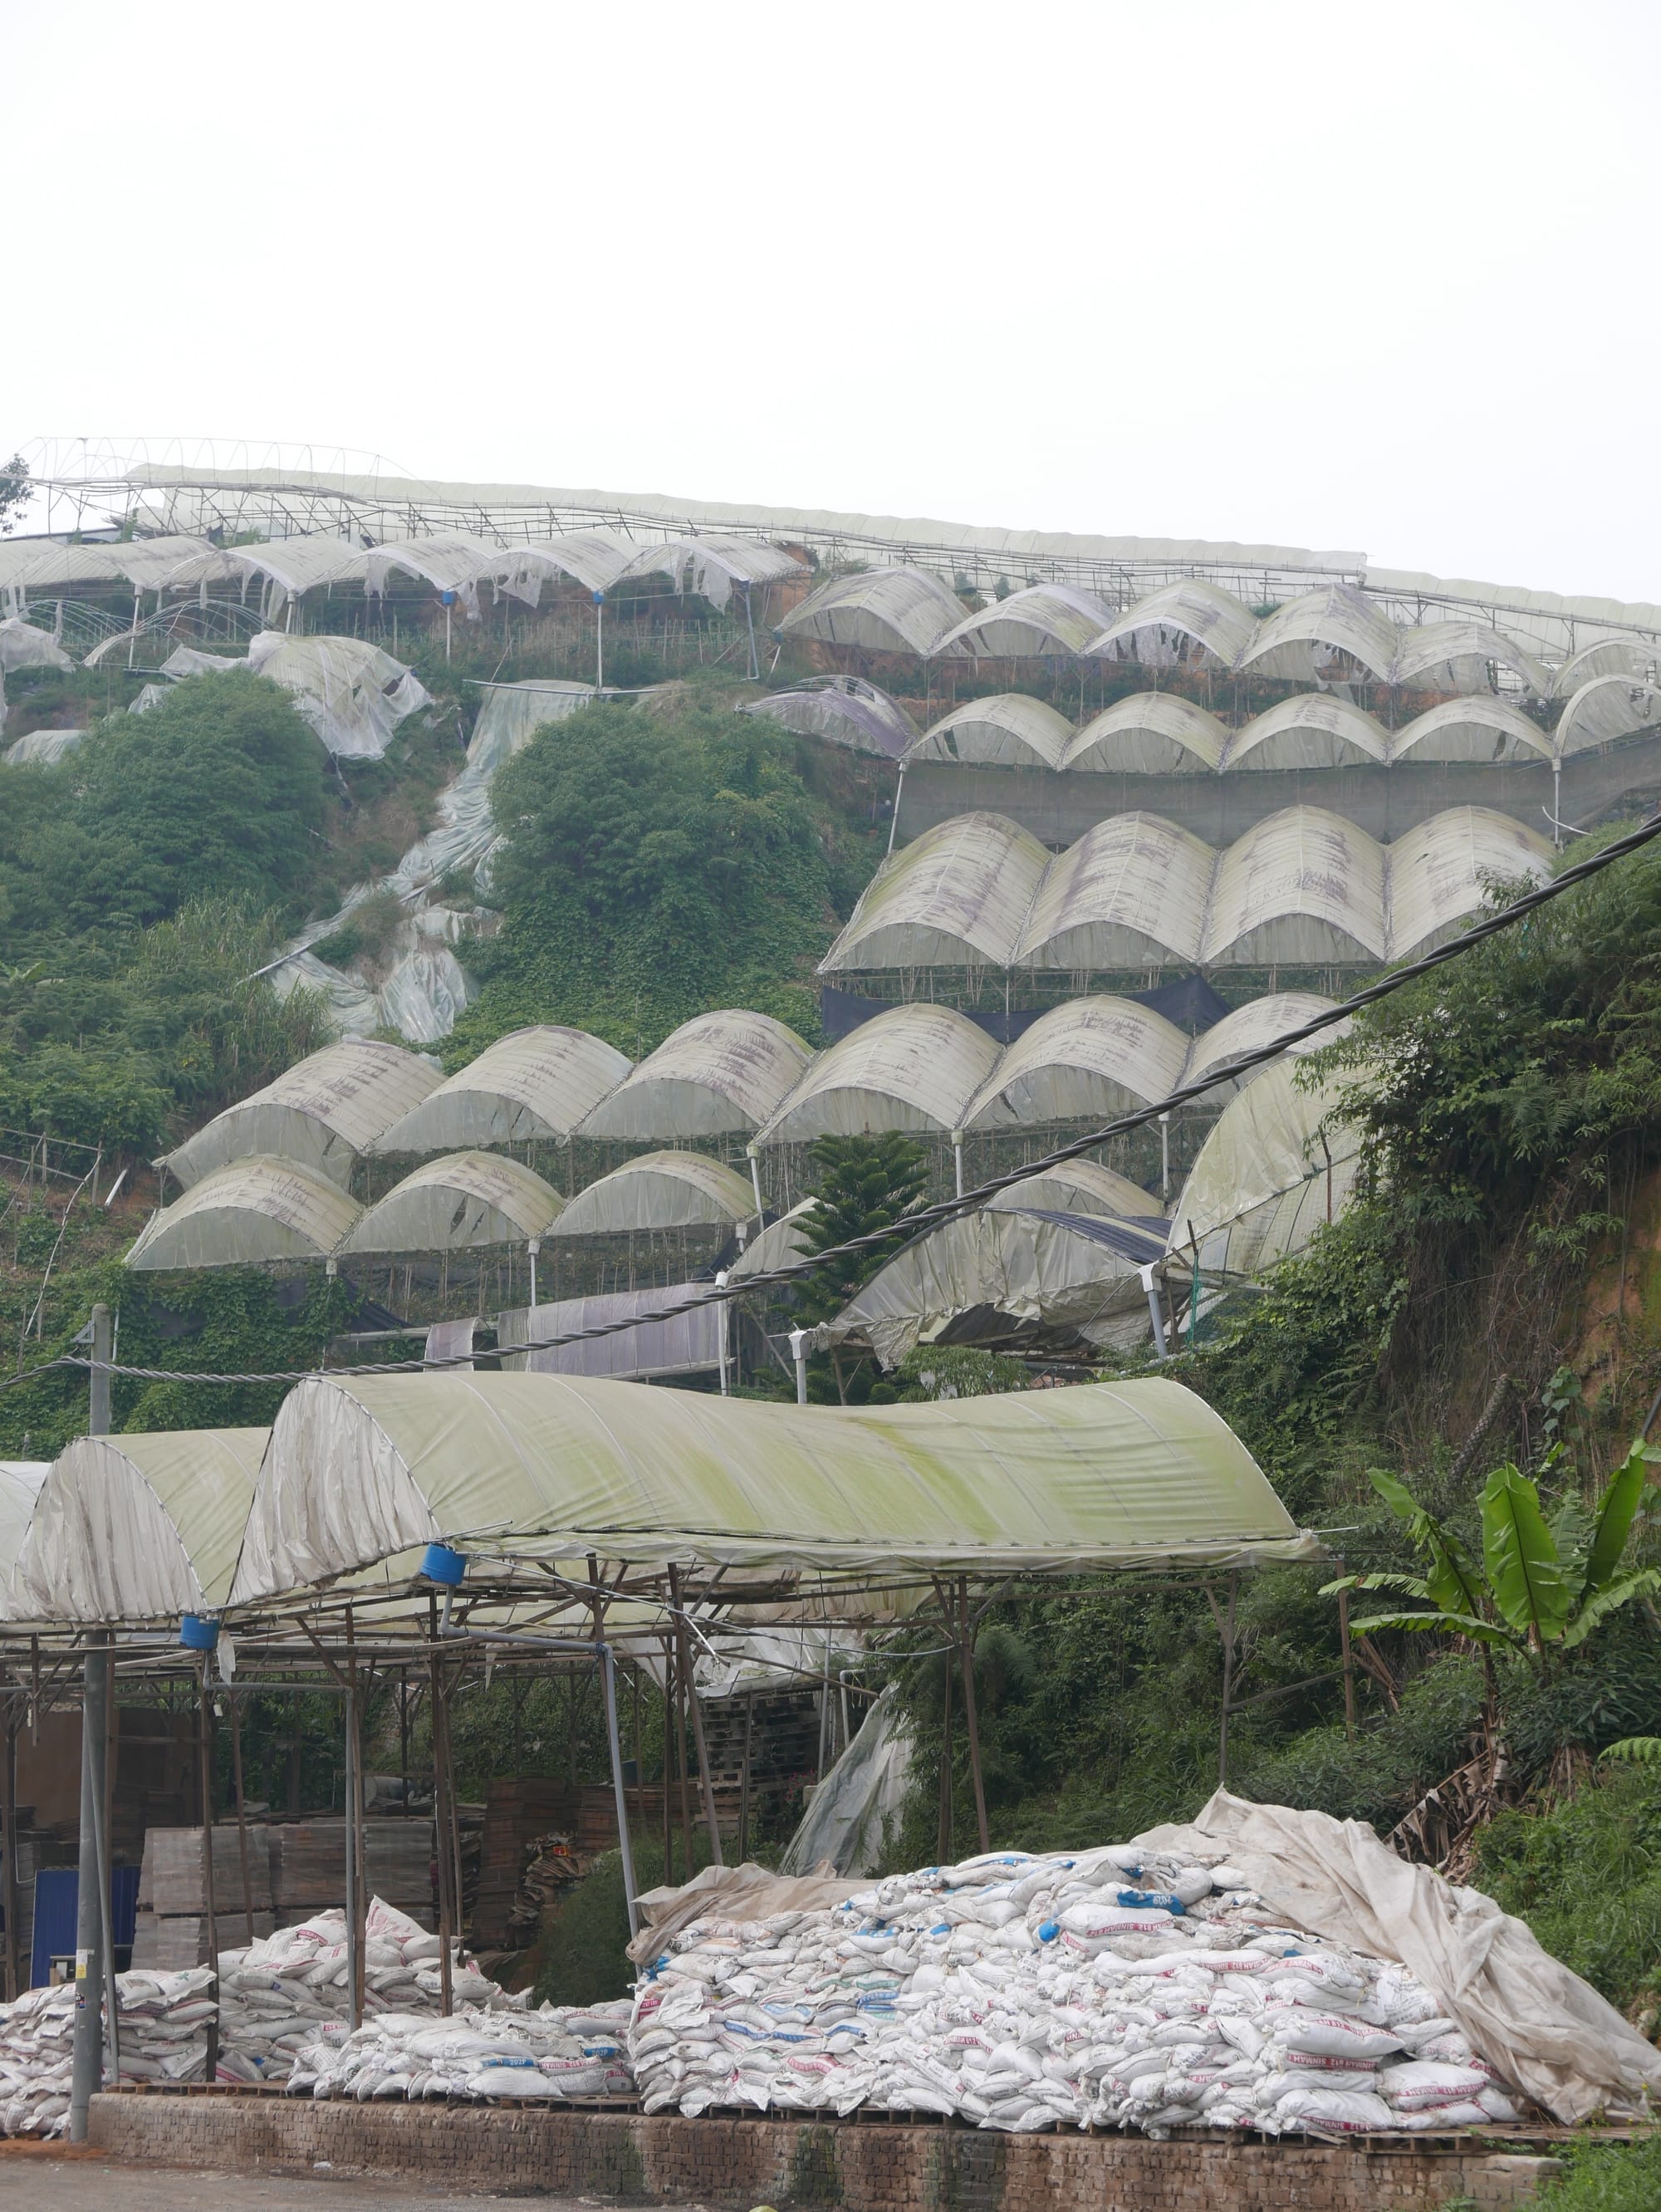 Photo by Author — the poly-tunnels of the Cameron Highlands, Malaysia